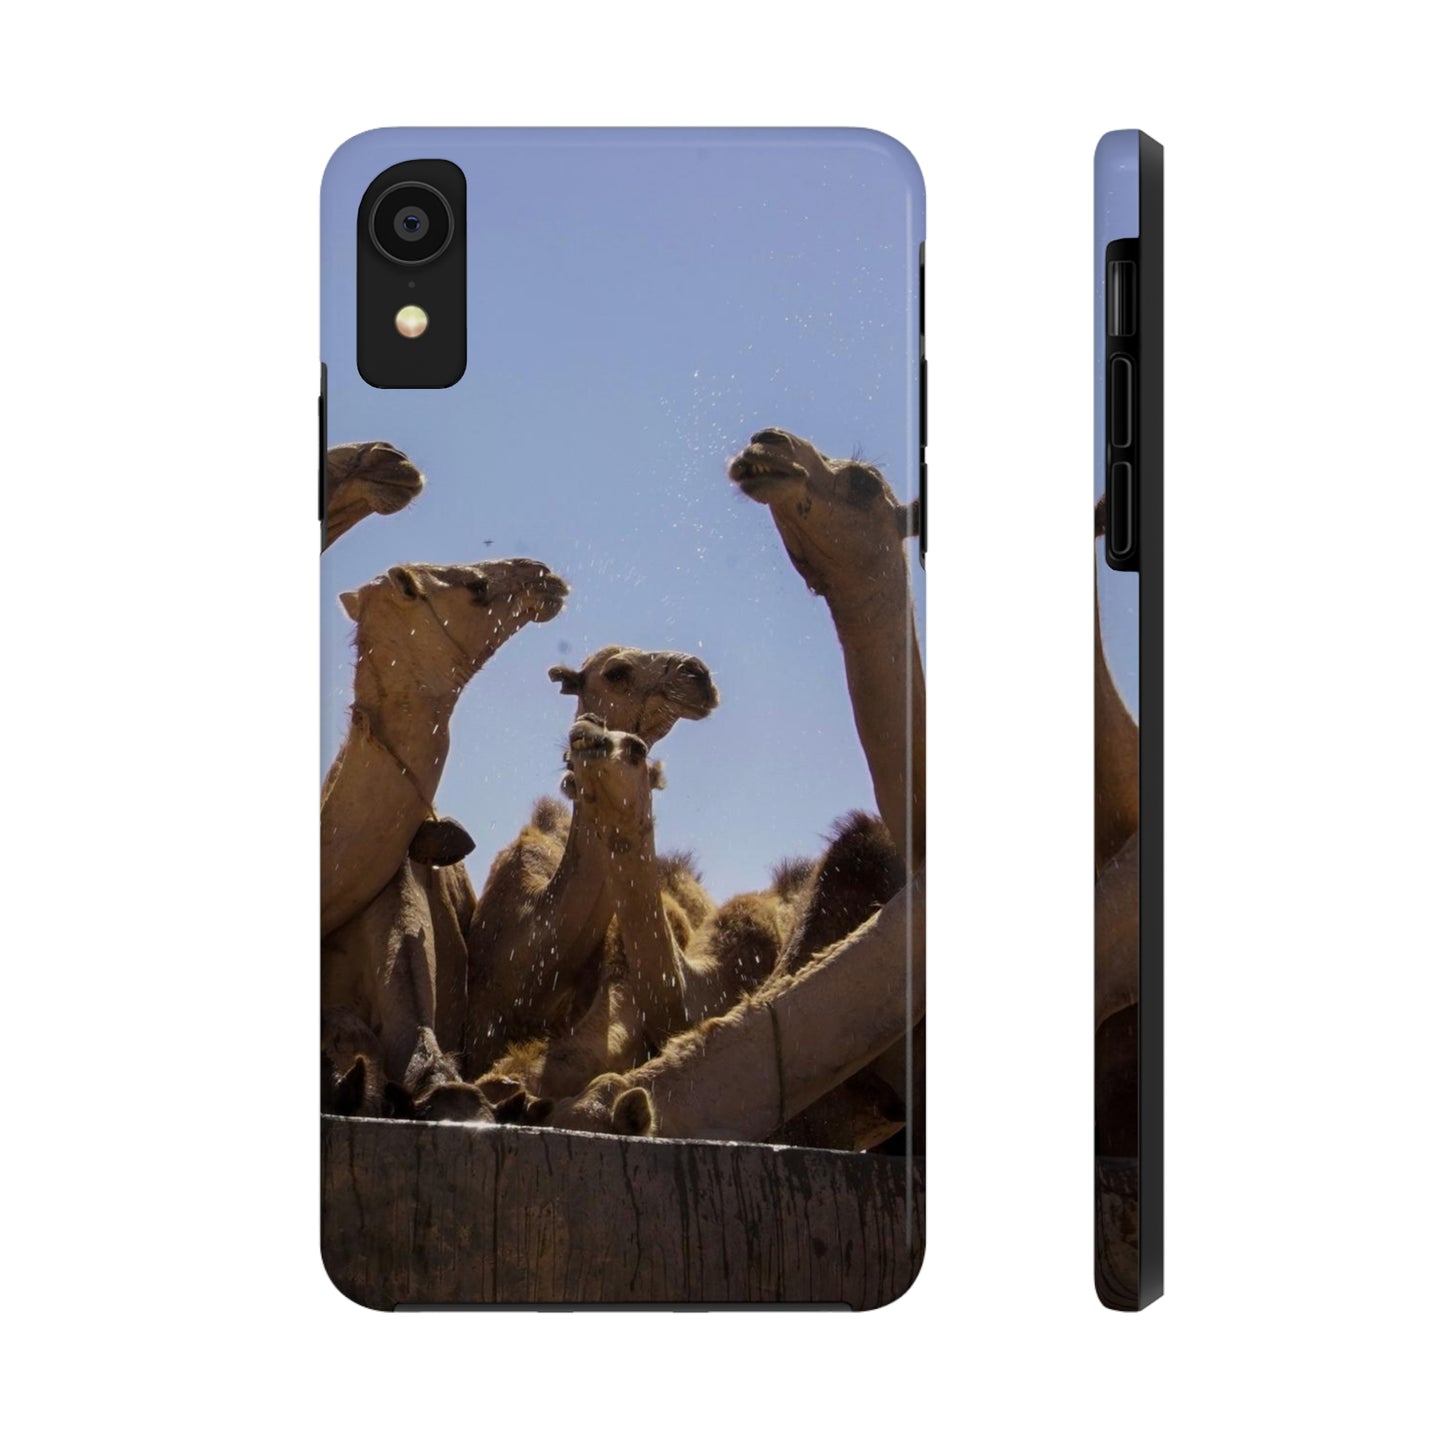 Tough iPhone Cases - Camels by Abdilaahi Persia